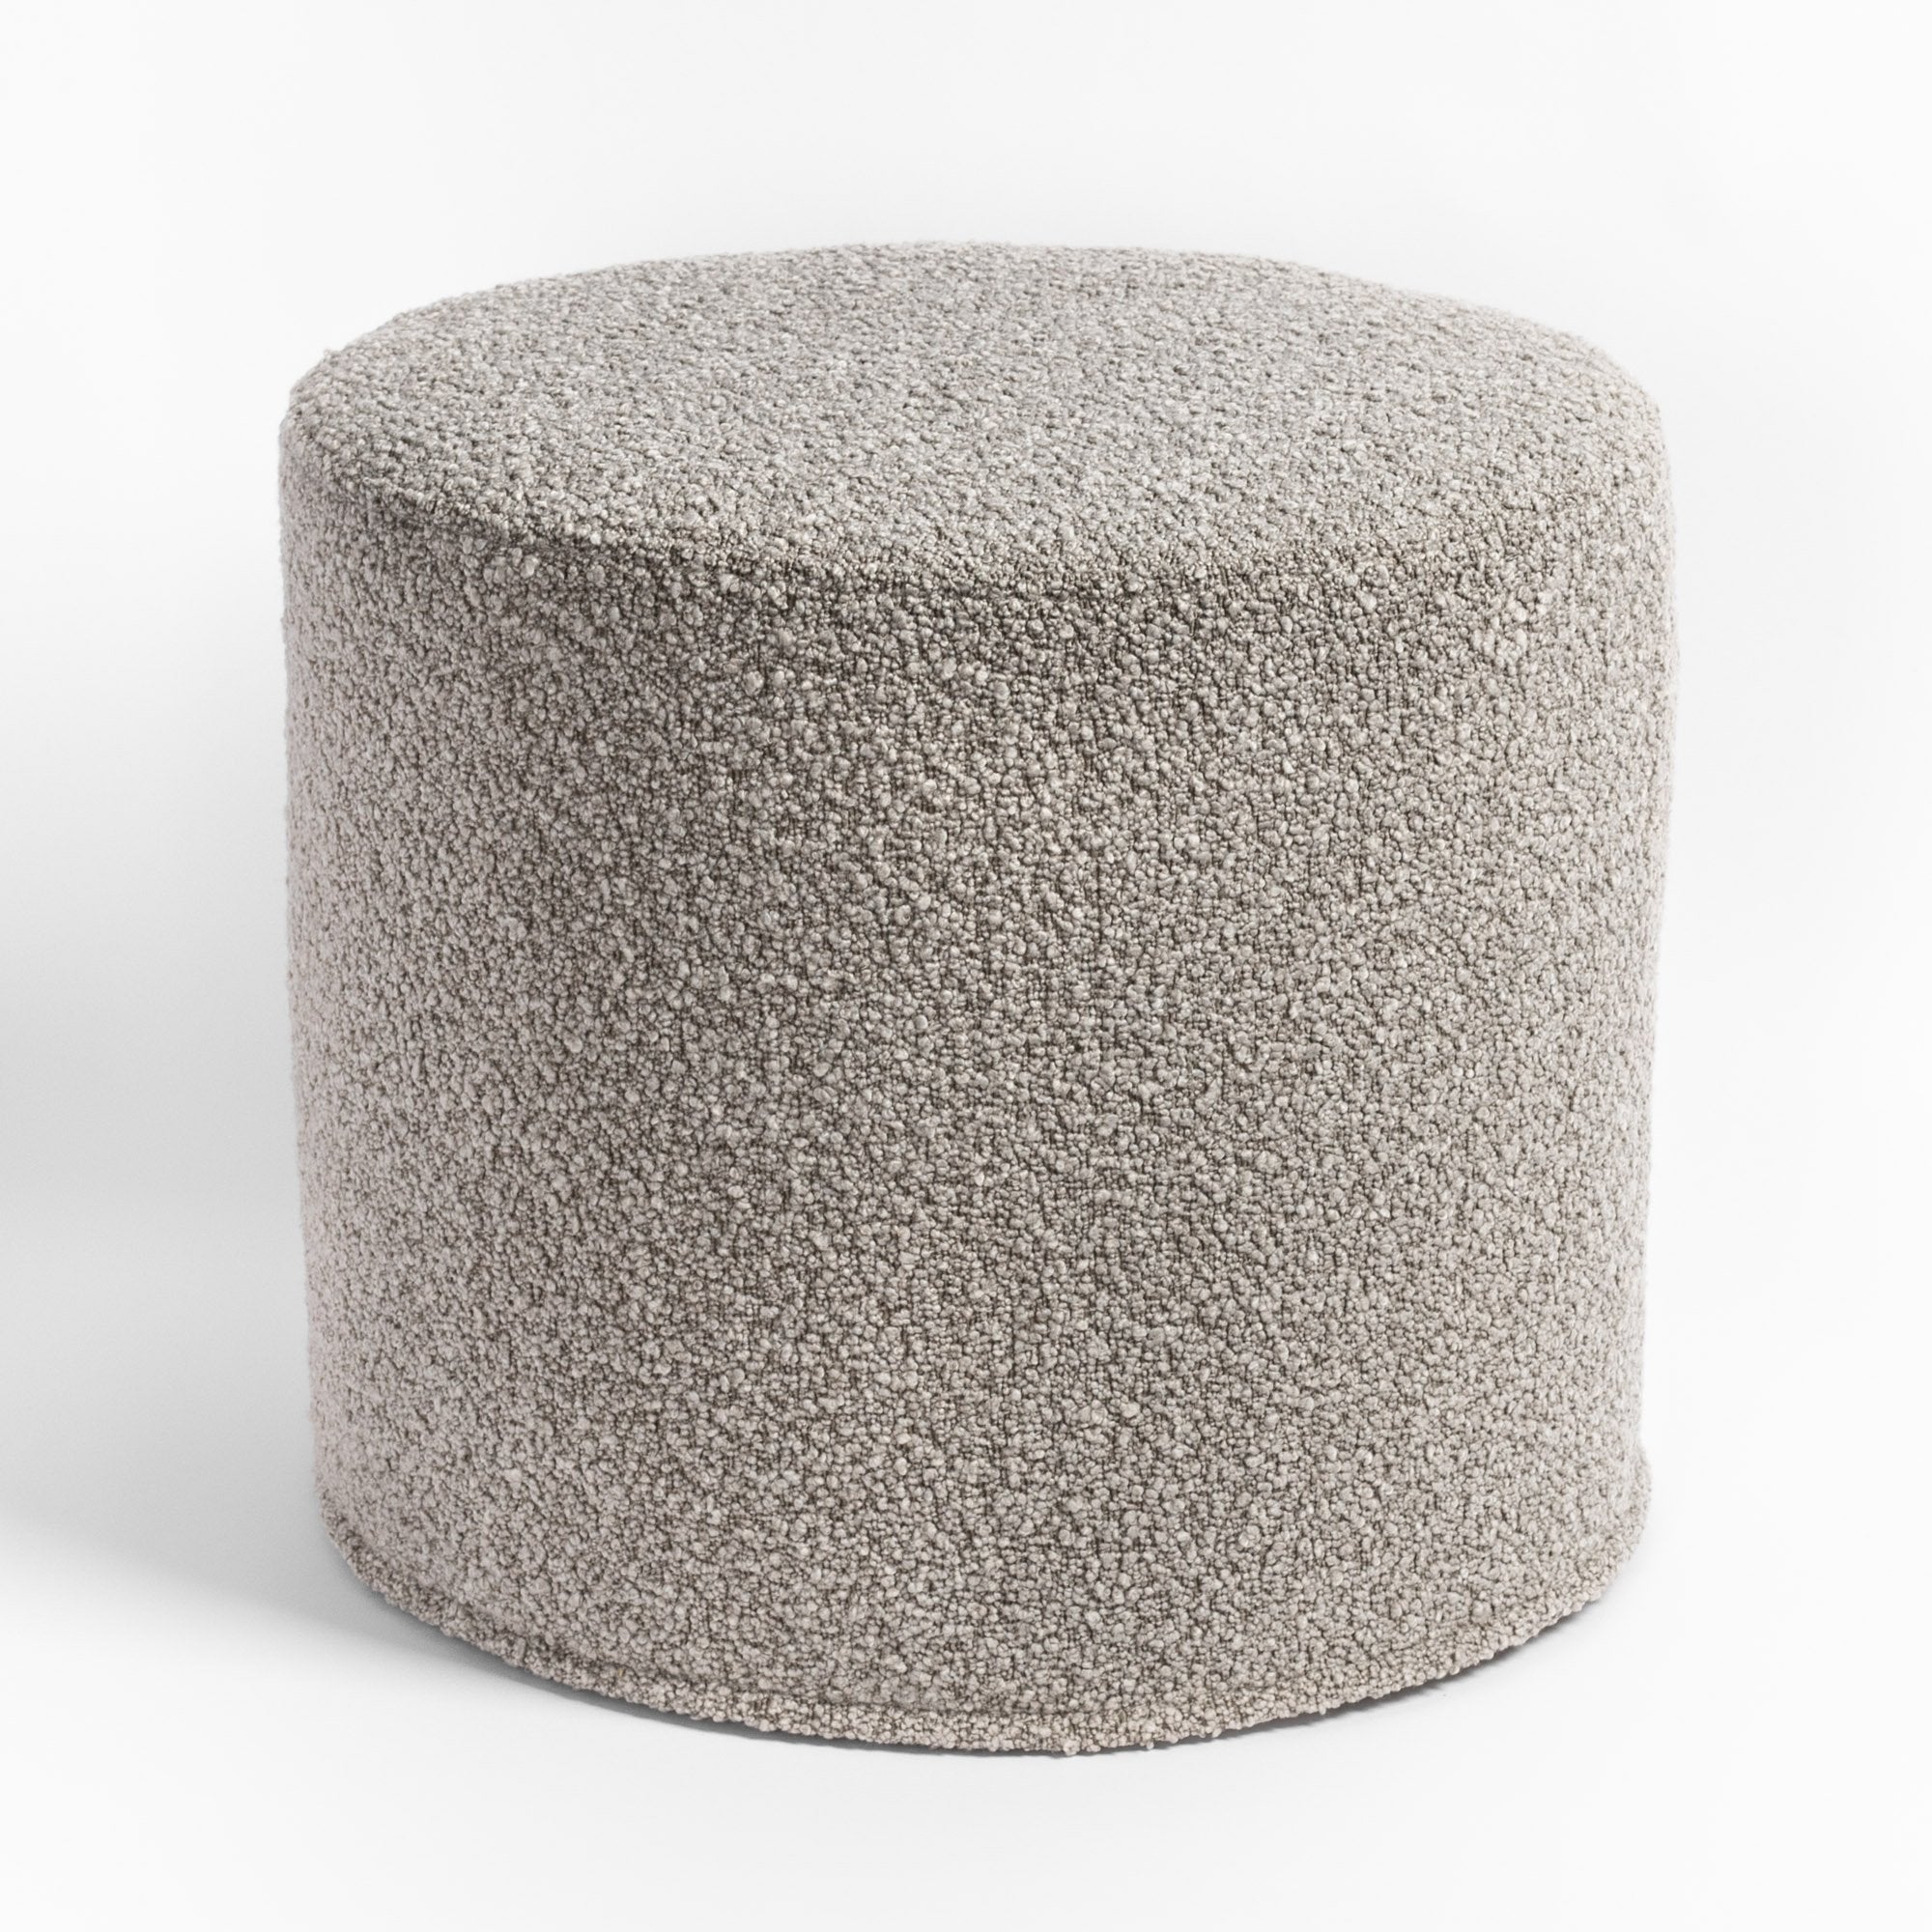 Cambie Boucle Silver Grey Ottoman, a mid gray boucle fabric round ottoman from Tonic Living